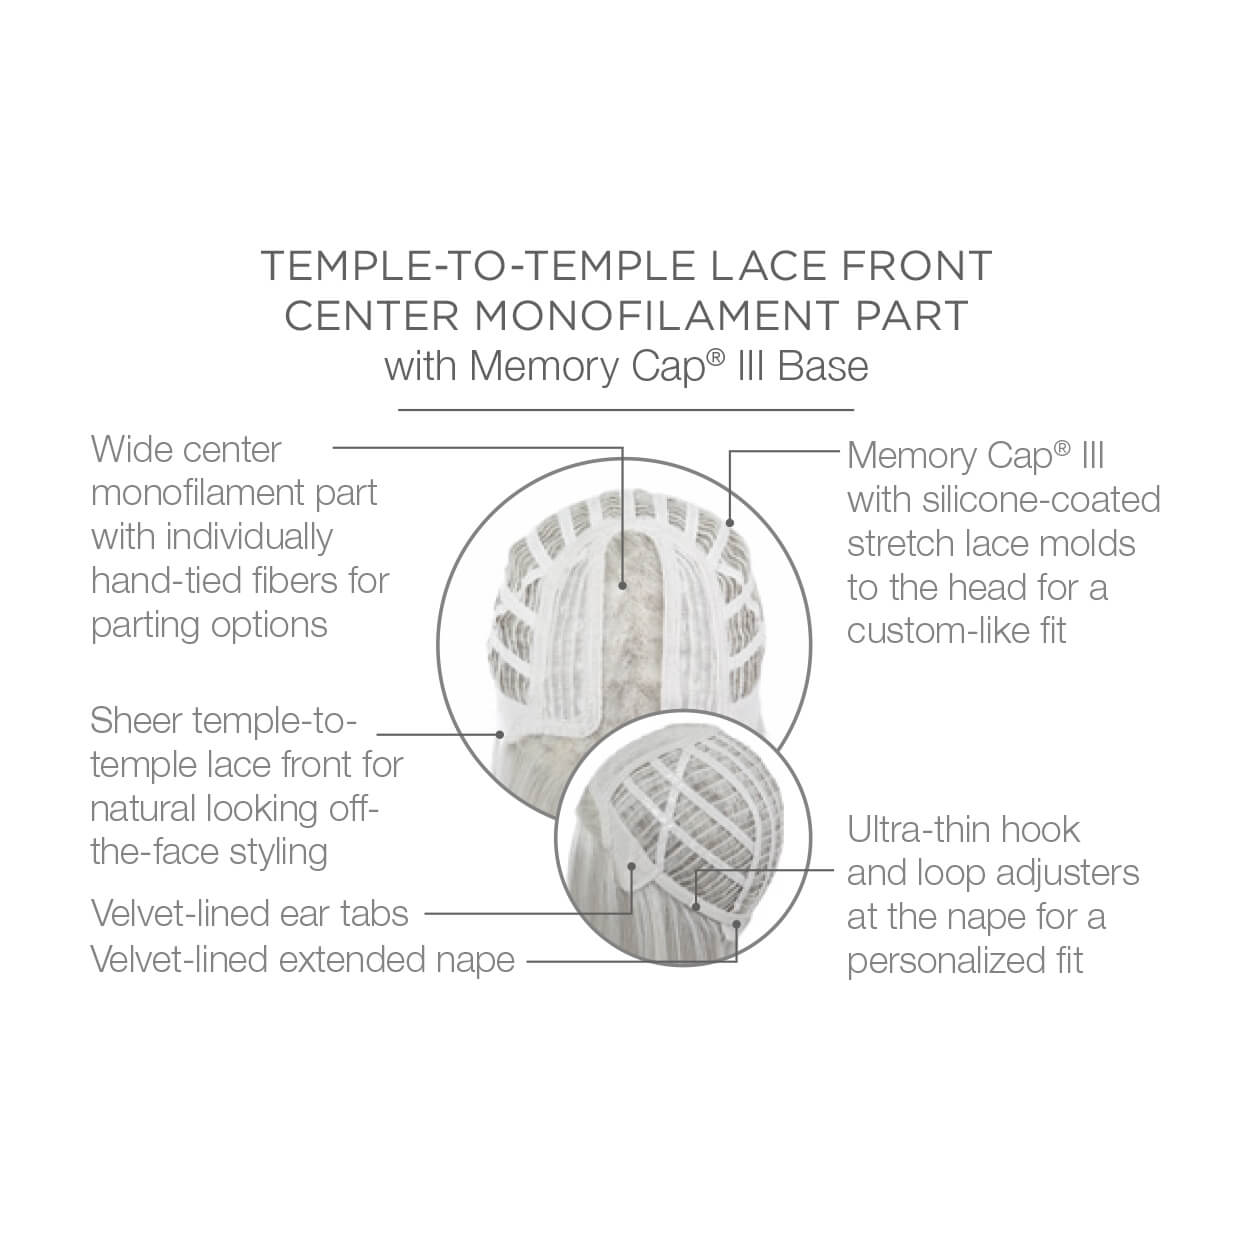 Temple to temple lace front center monofilament part with Memory Cap III Base